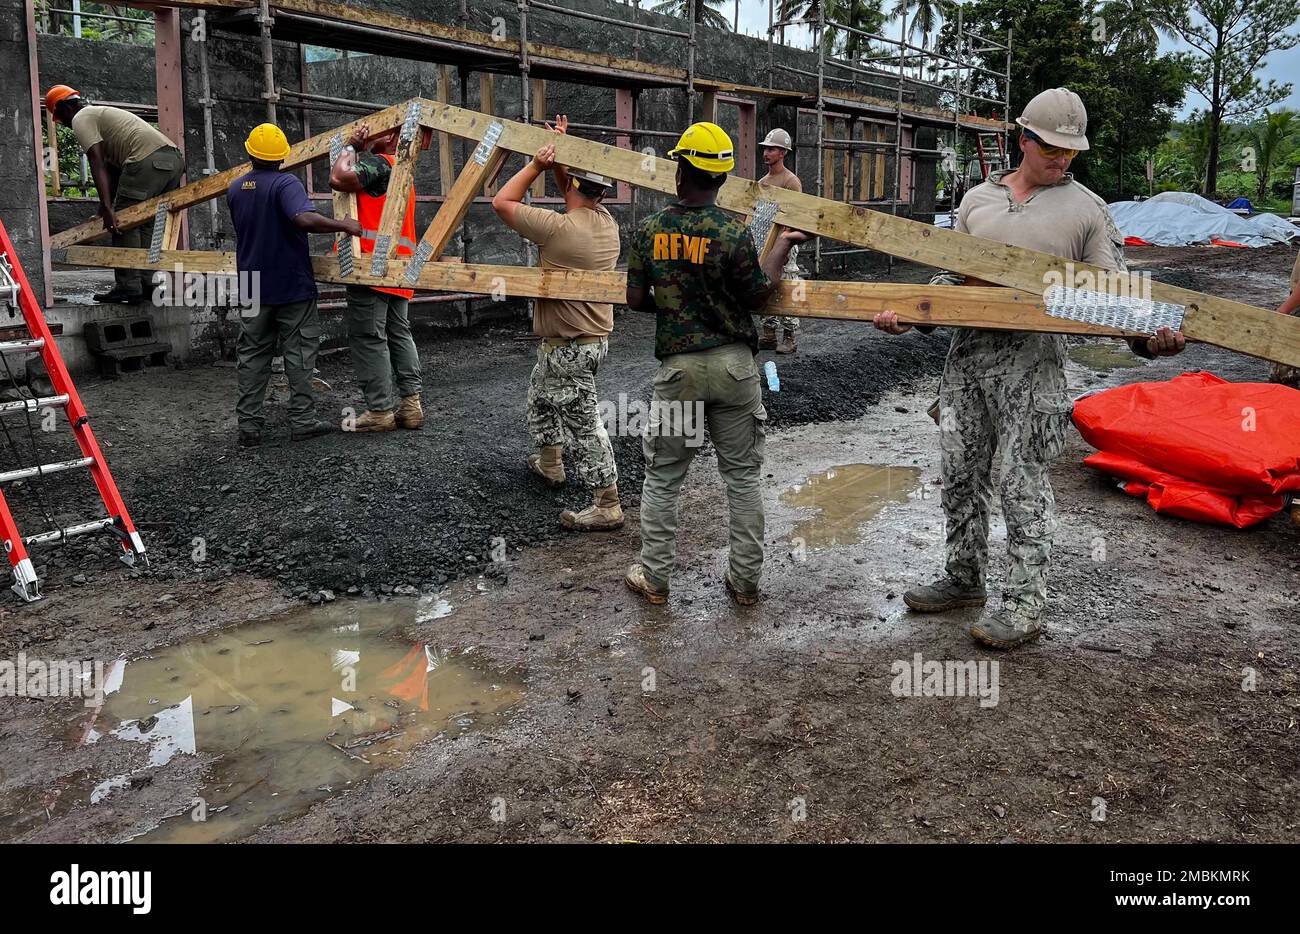 SAVUSAVU, Republic of Fiji (June 16, 2022) U.S. Navy Seabees assigned to Naval Mobile Construction Battalion 3 (NMCB-3), alongside members of the Republic of Fiji Military, position roof trusses in support of a Pacific Partnership 2022 engineering project in Savusavu, Fiji. Now in its 17th year, Pacific Partnership is the largest annual multinational humanitarian assistance and disaster relief preparedness mission conducted in the Indo-Pacific. Stock Photo